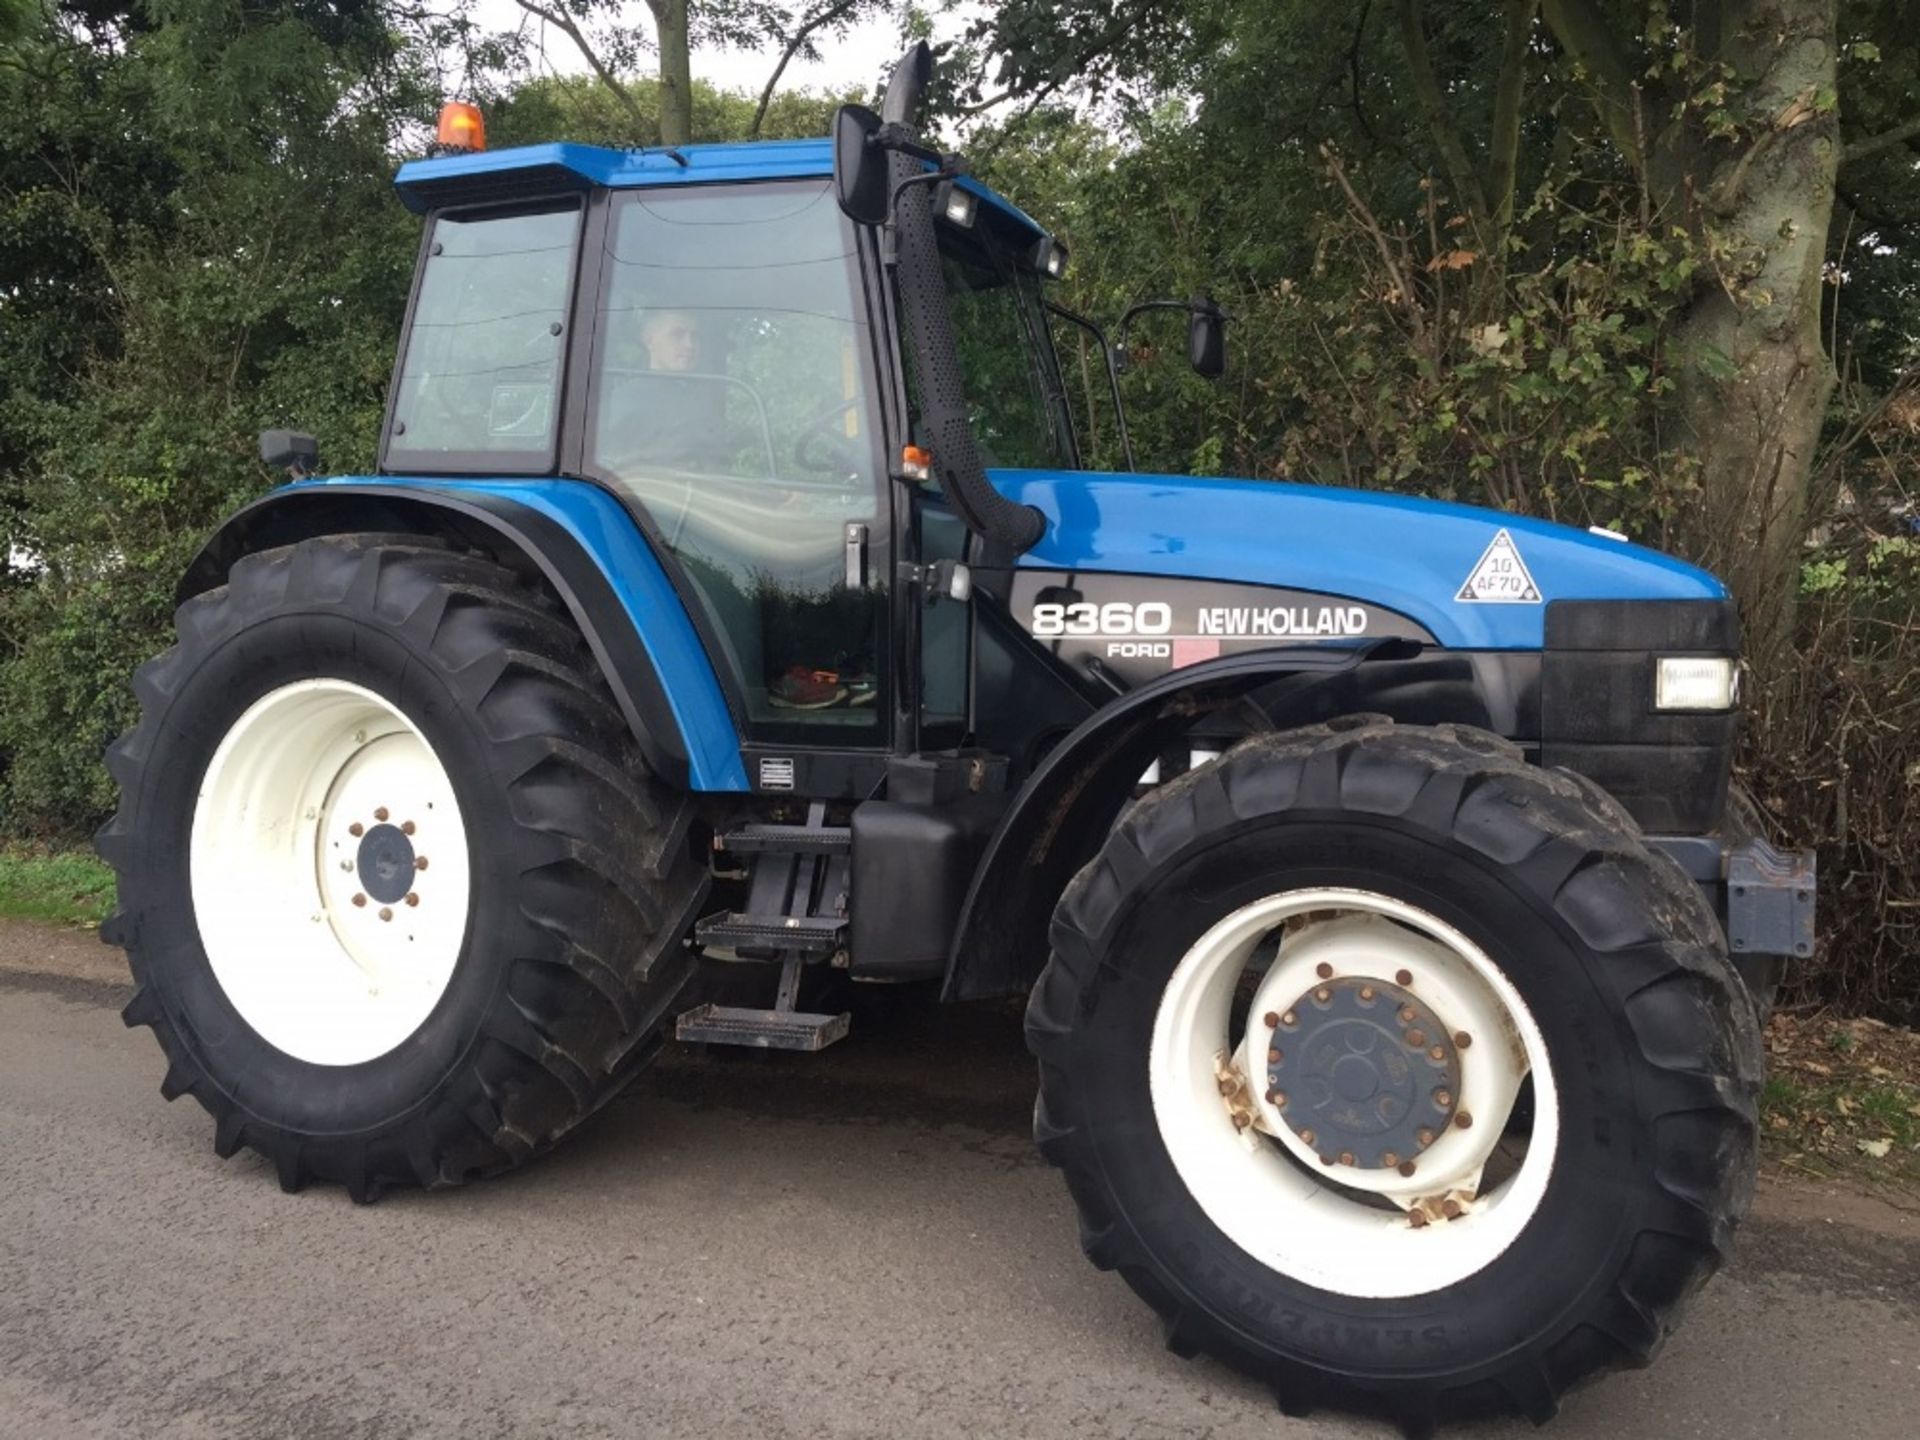 1997 New Holland 8360 Range Command 4wd Tractor with Air Con. 1 owner Reg No R923 HHR Ser No - Image 2 of 6